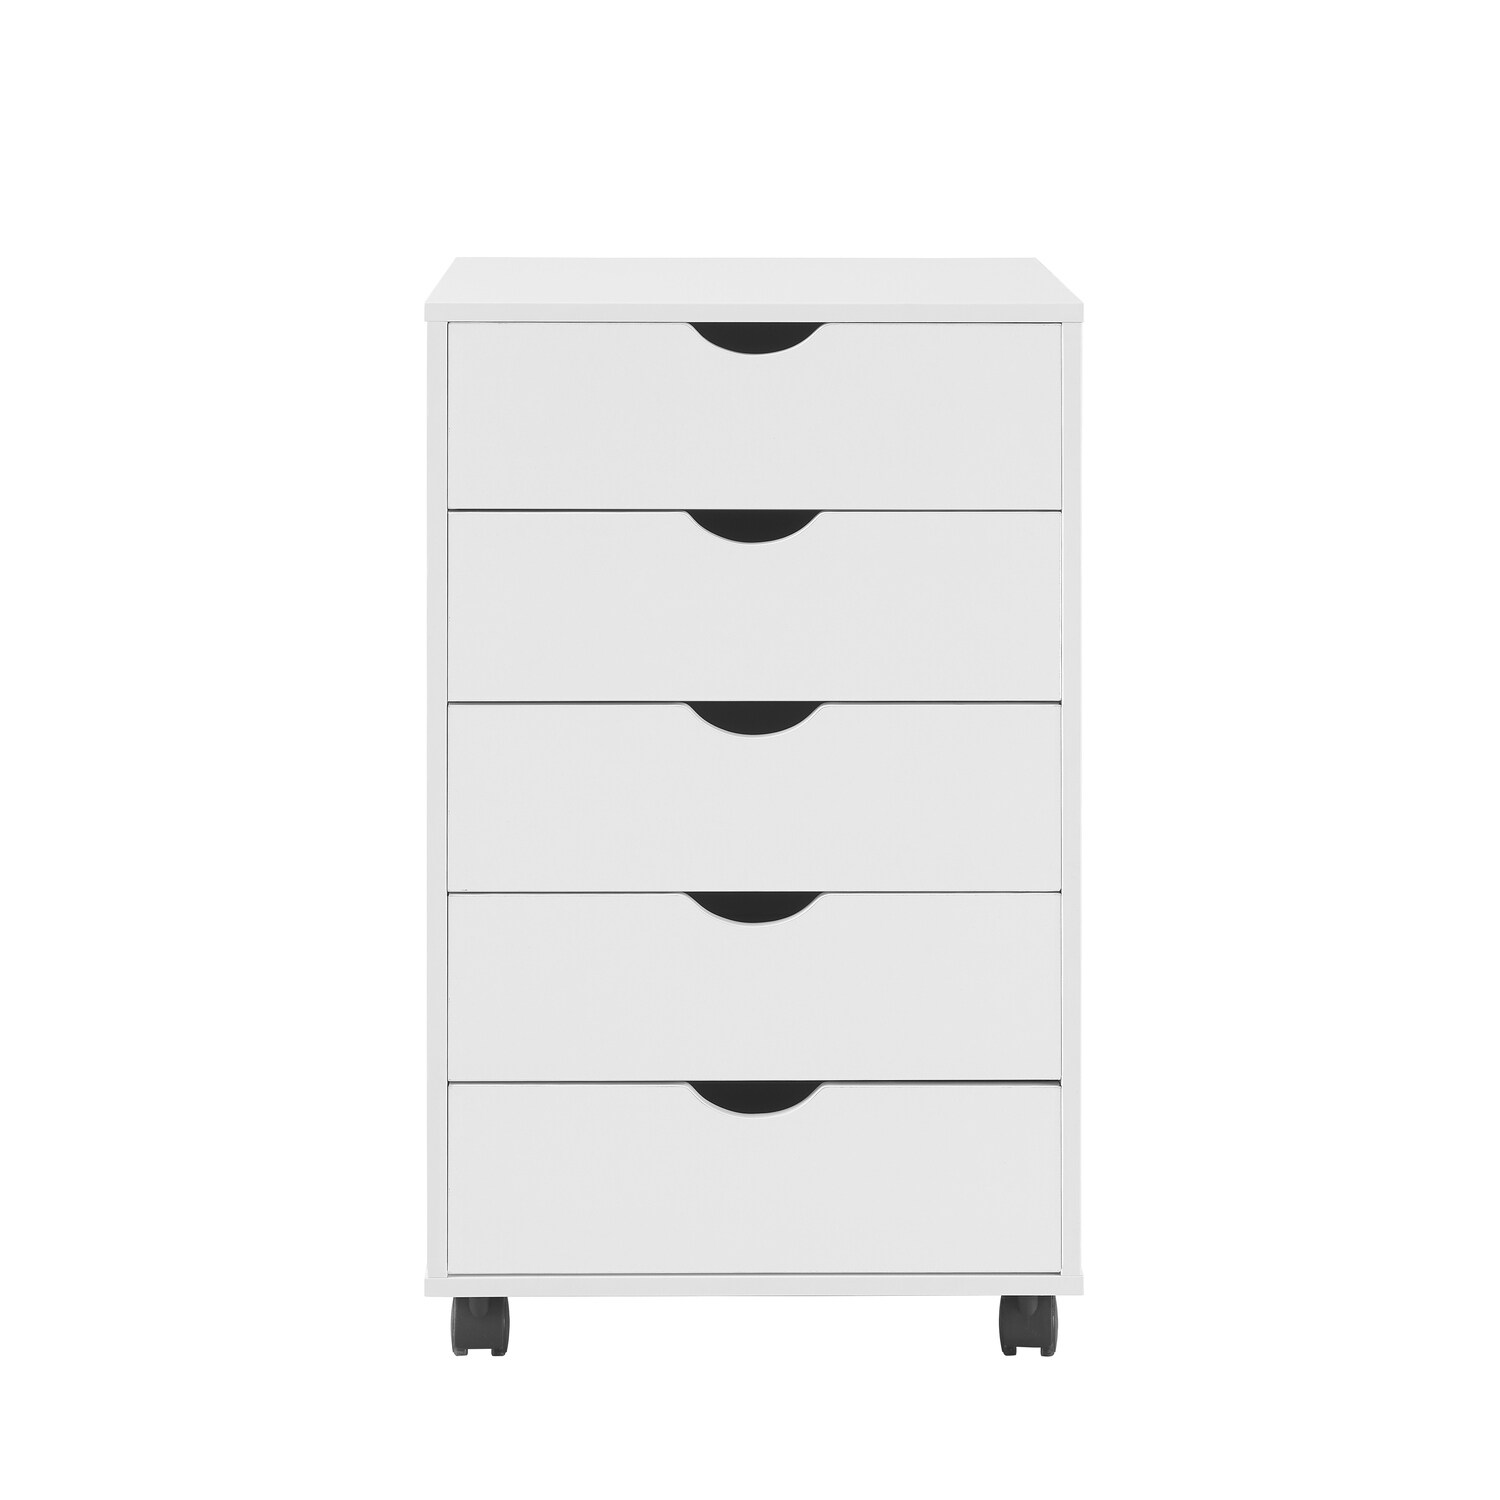 Office File Cabinets Wooden File Cabinets Lateral File Cabinet Wood File Cabinet Mobile File Cabinet Mobile Storage Cabinet White - image 5 of 5